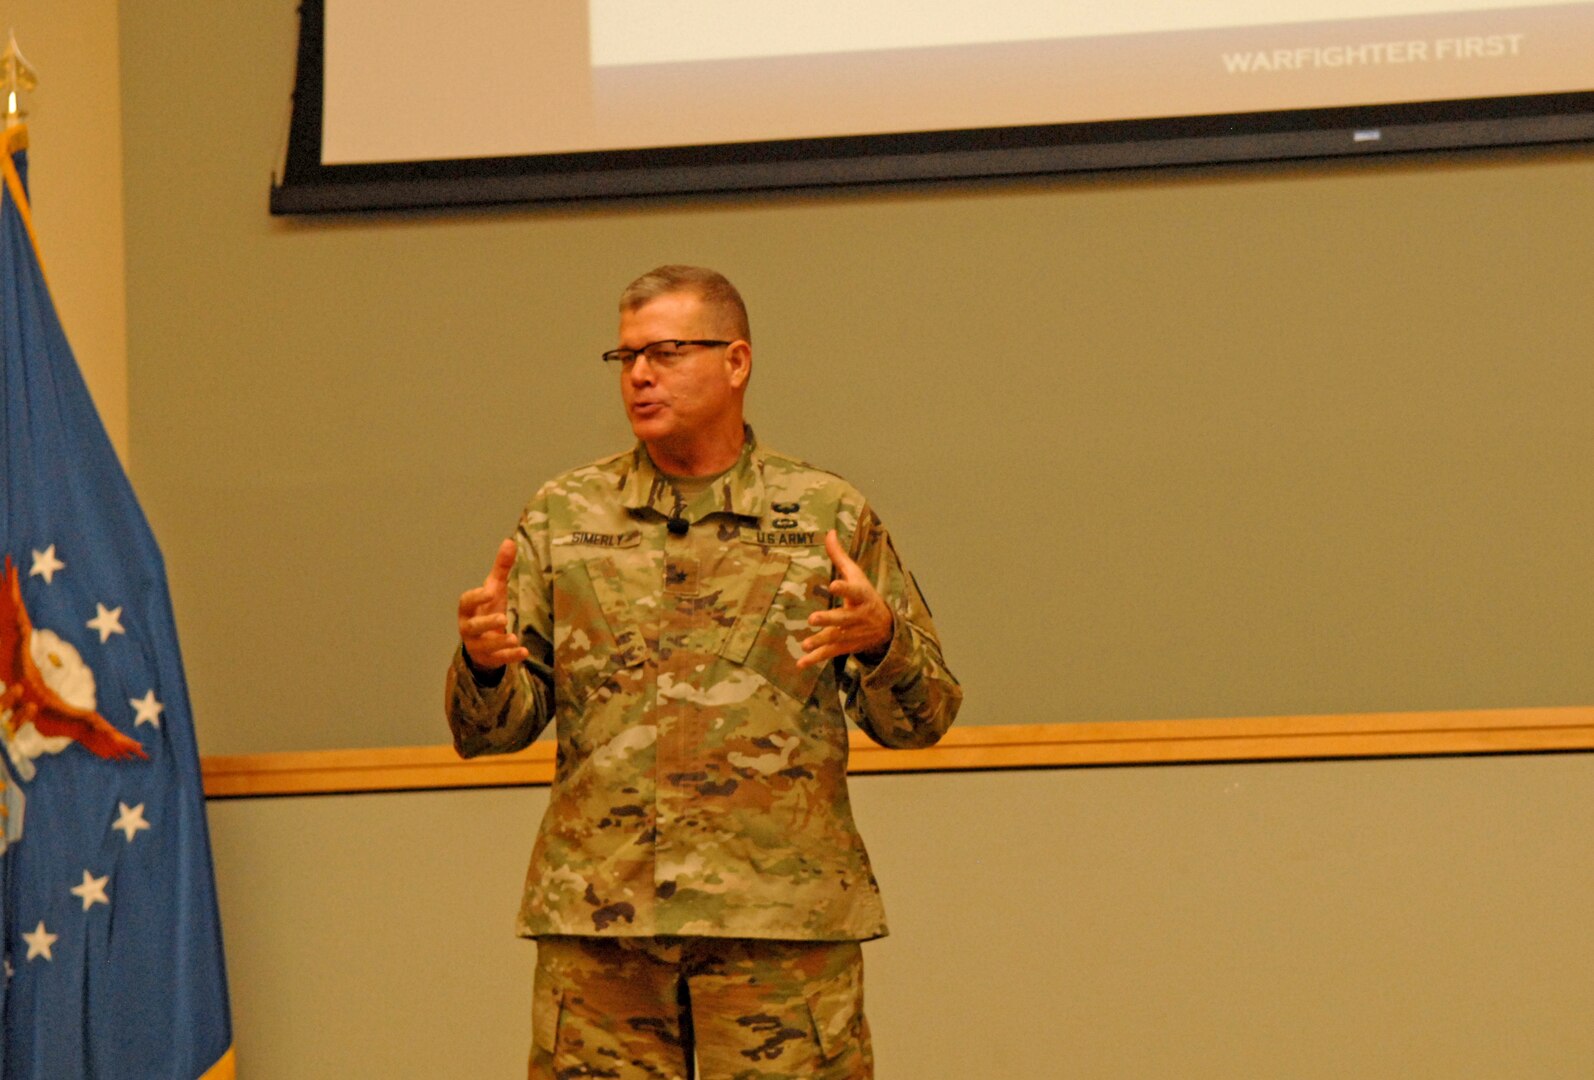 DLA Troop Support commander hosts town hall with DLA CIO